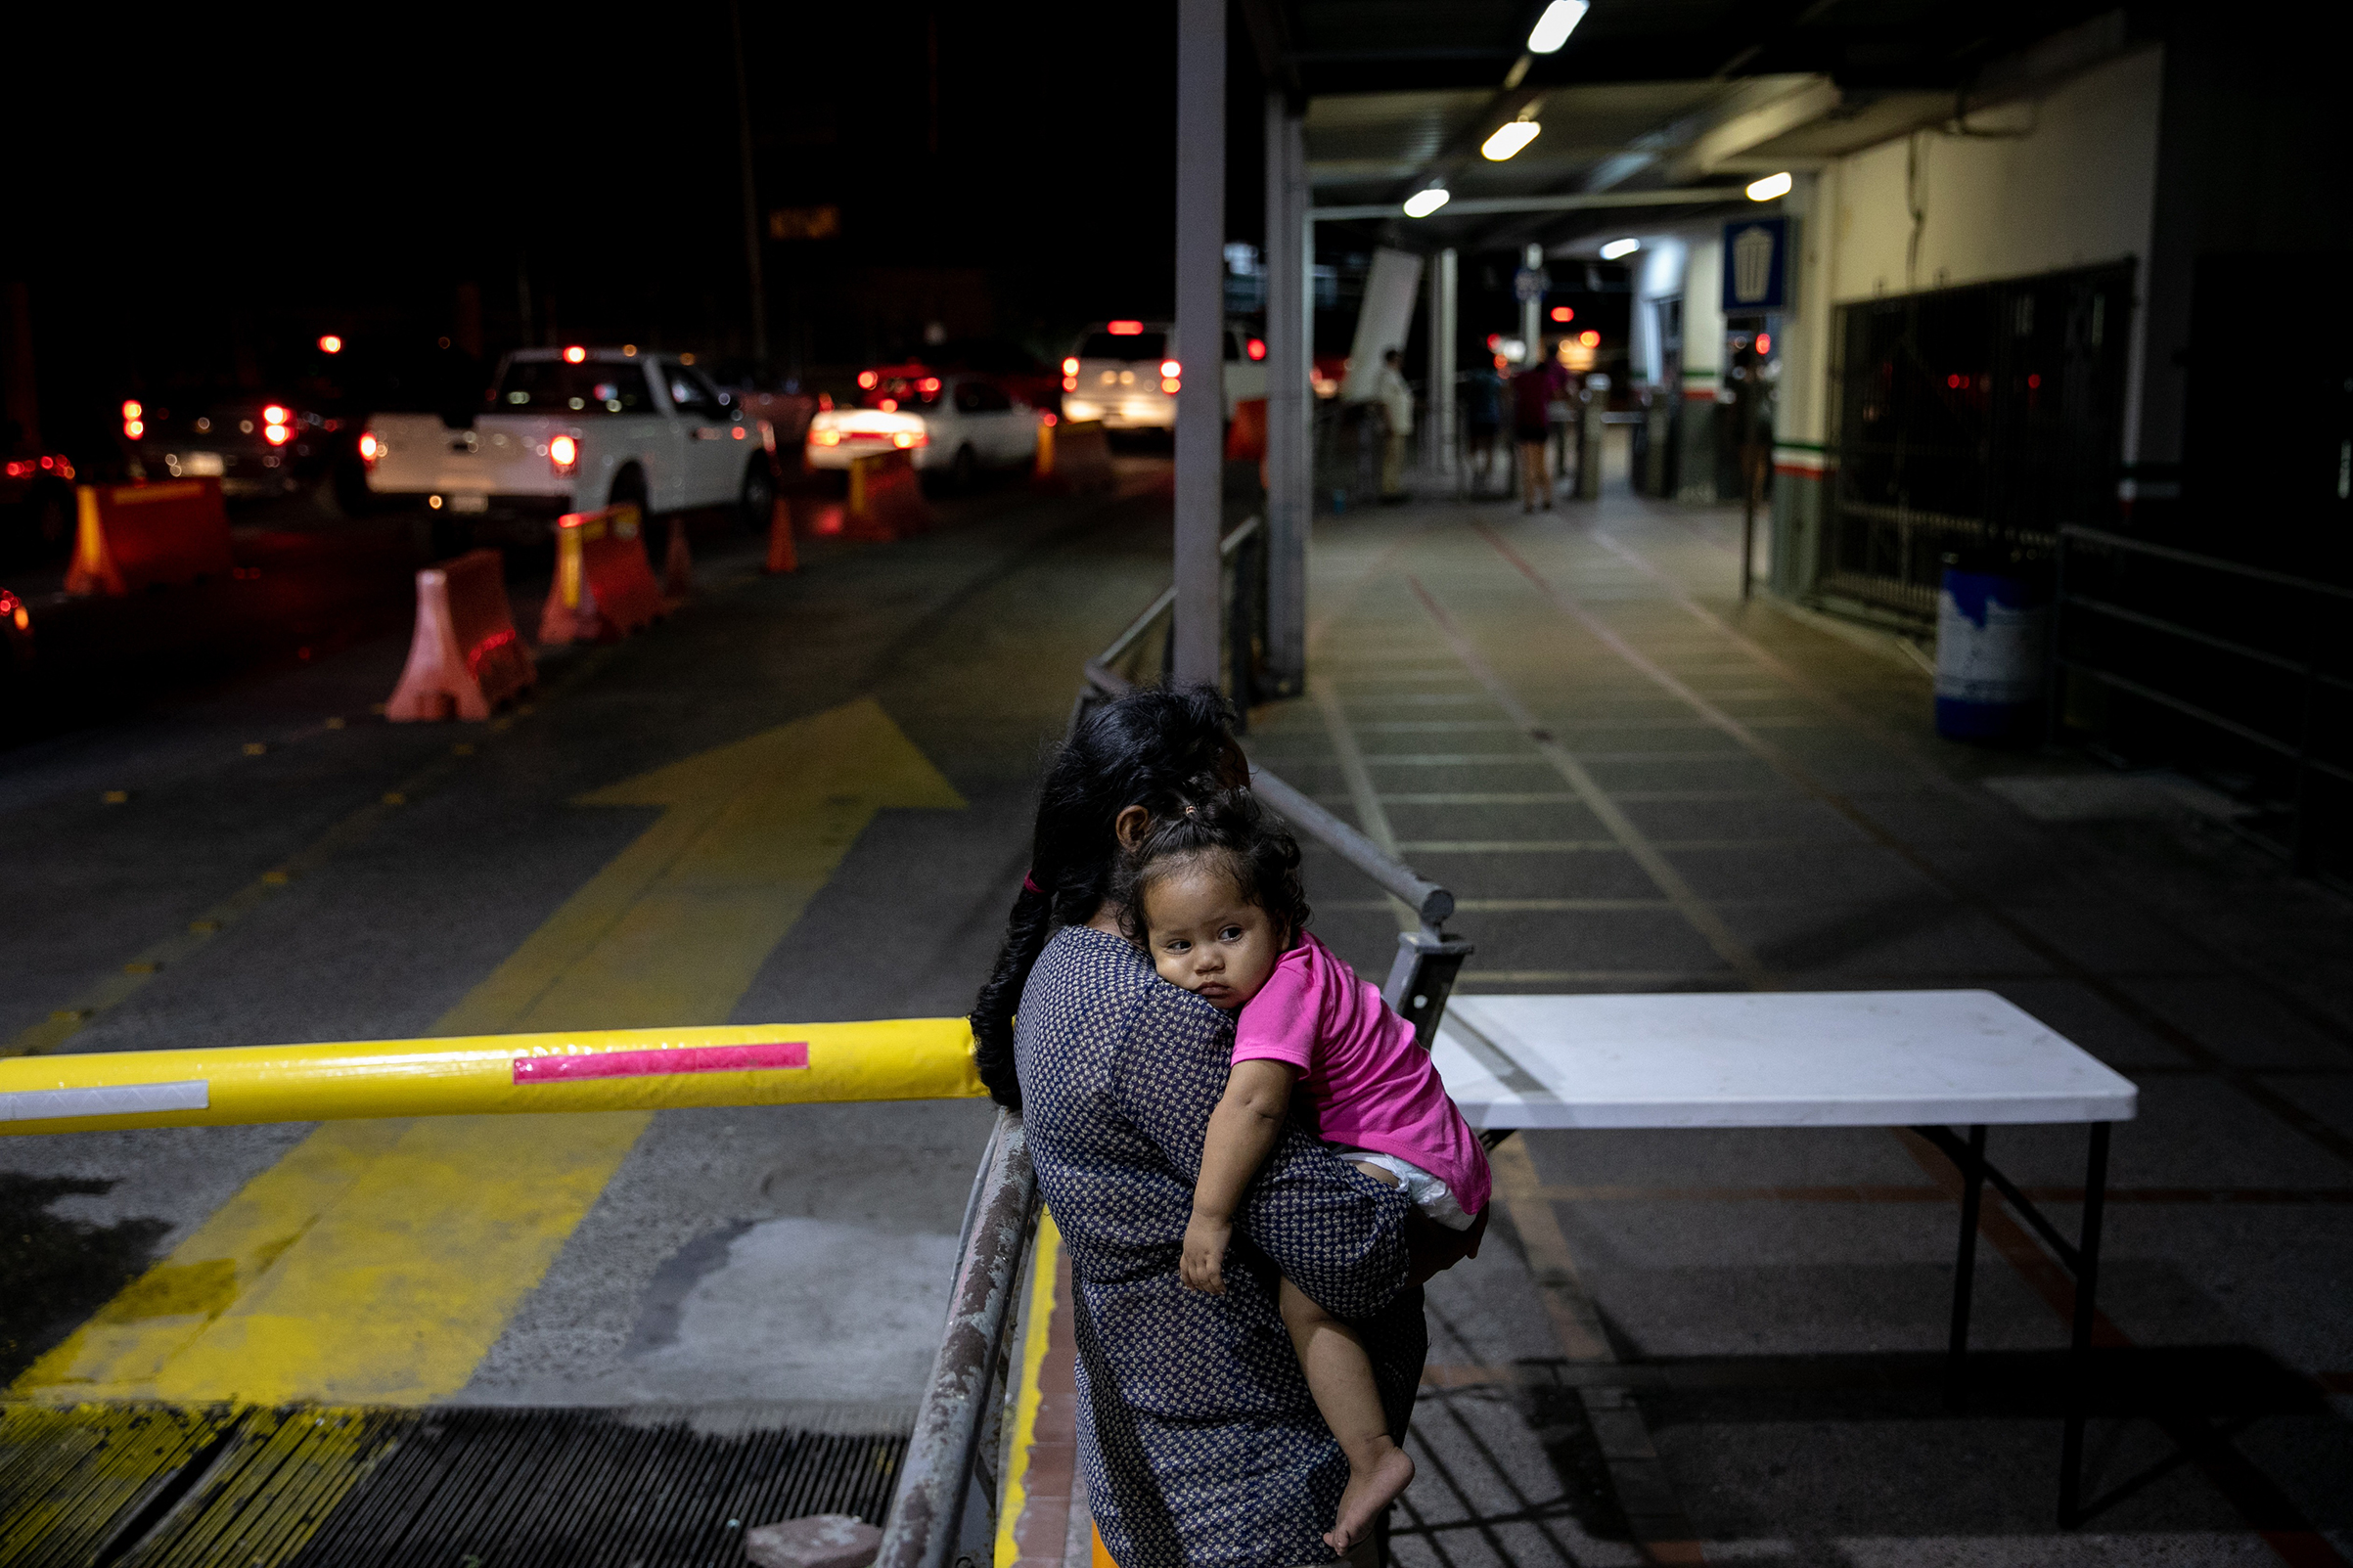 Asylum seekers at the gates to the U.S. face barriers even at official crossings like this bridge in Matamoros, Mexico (Ilana Panich-Linsman for TIME)